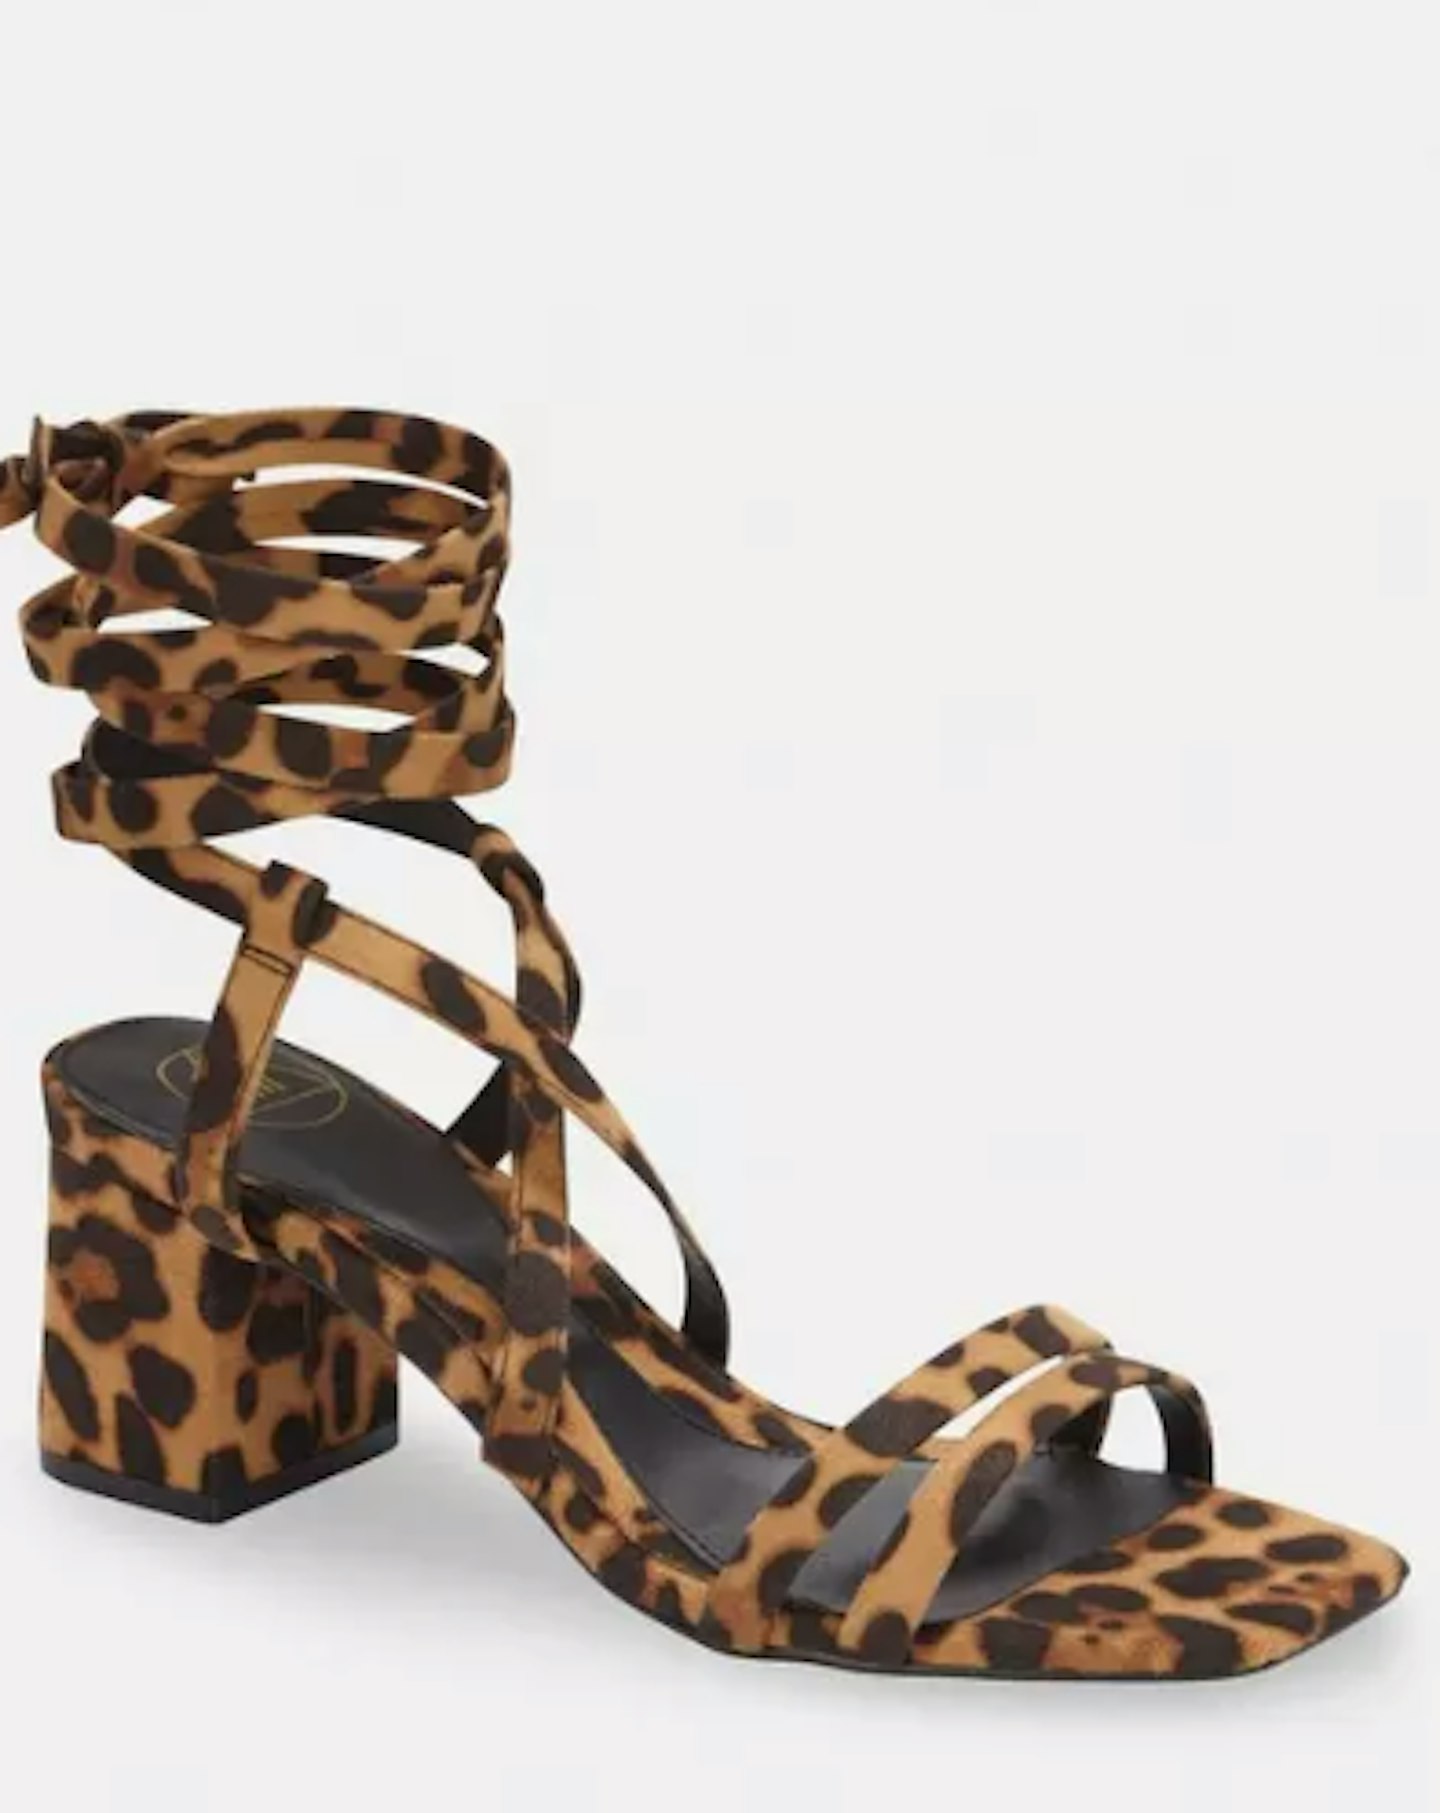 Brown Leopard Two-strap Lace-up Mid Heel Sandals, £25.20